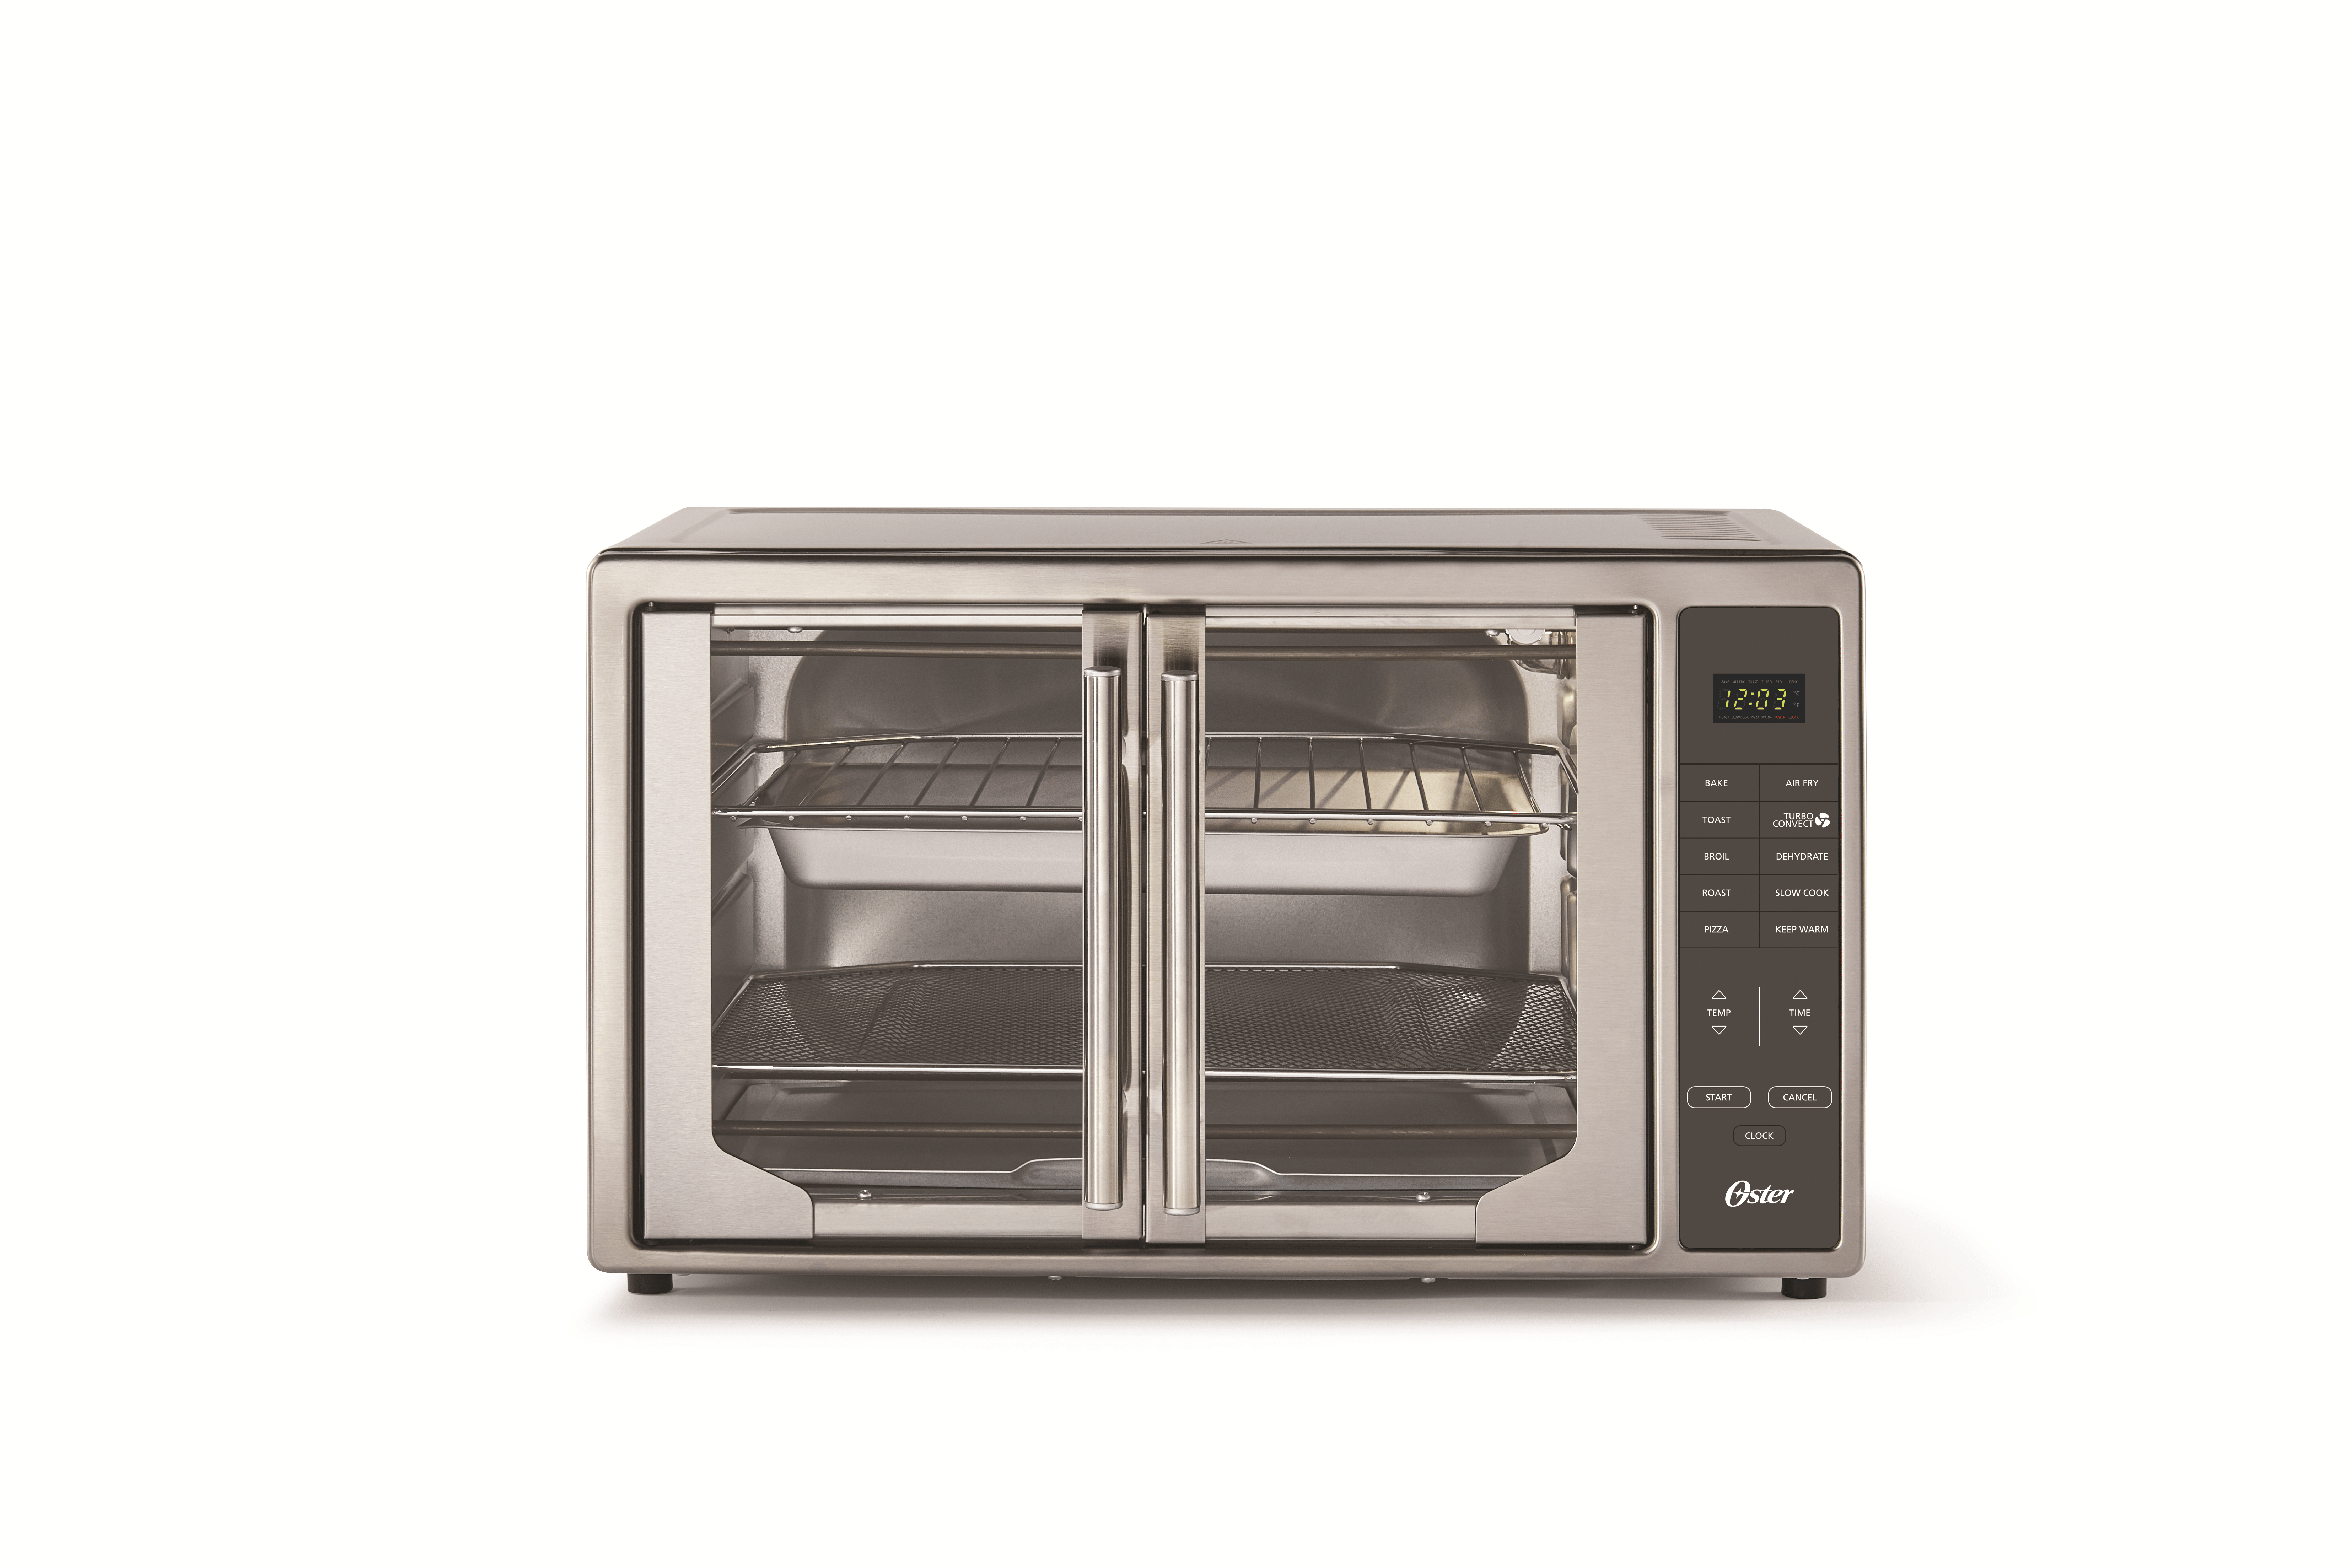 New Oster Digital French Door with Air Fry Countertop Oven